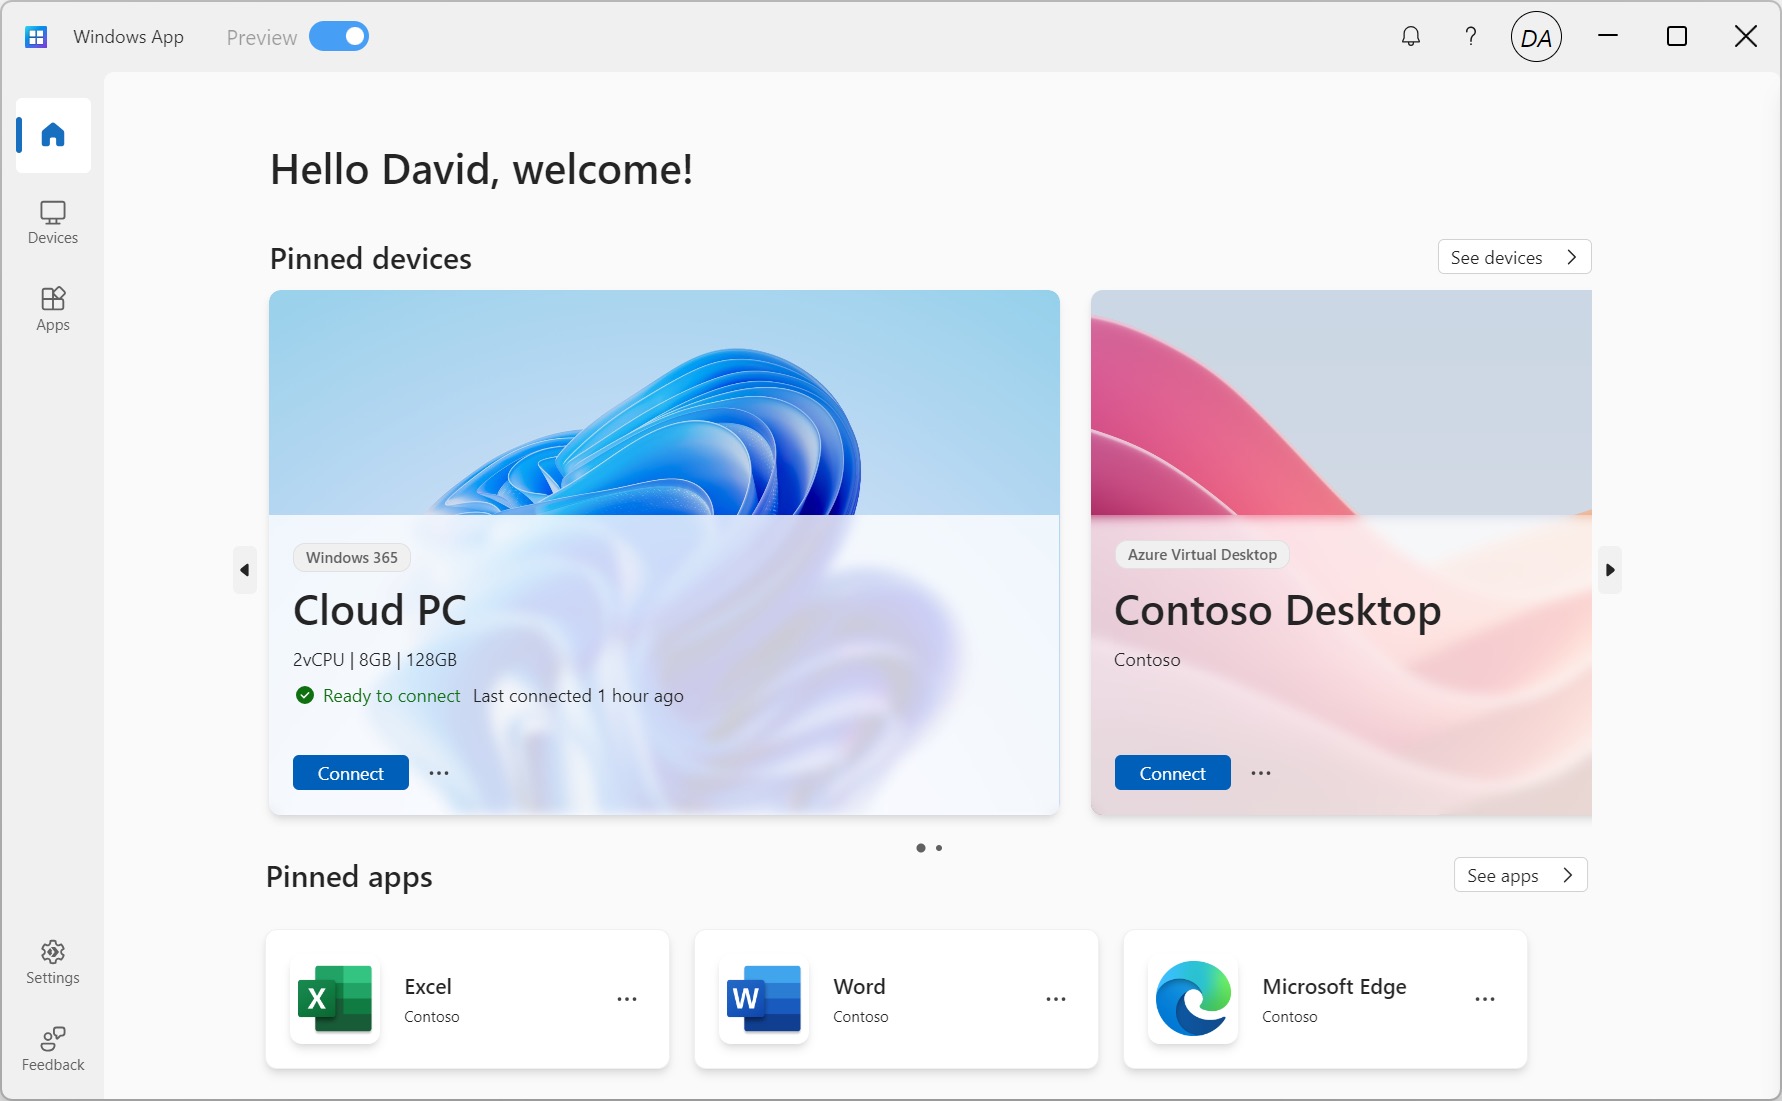 Microsoft ‘Windows App’ Offers Access to Windows PCs From Any Device